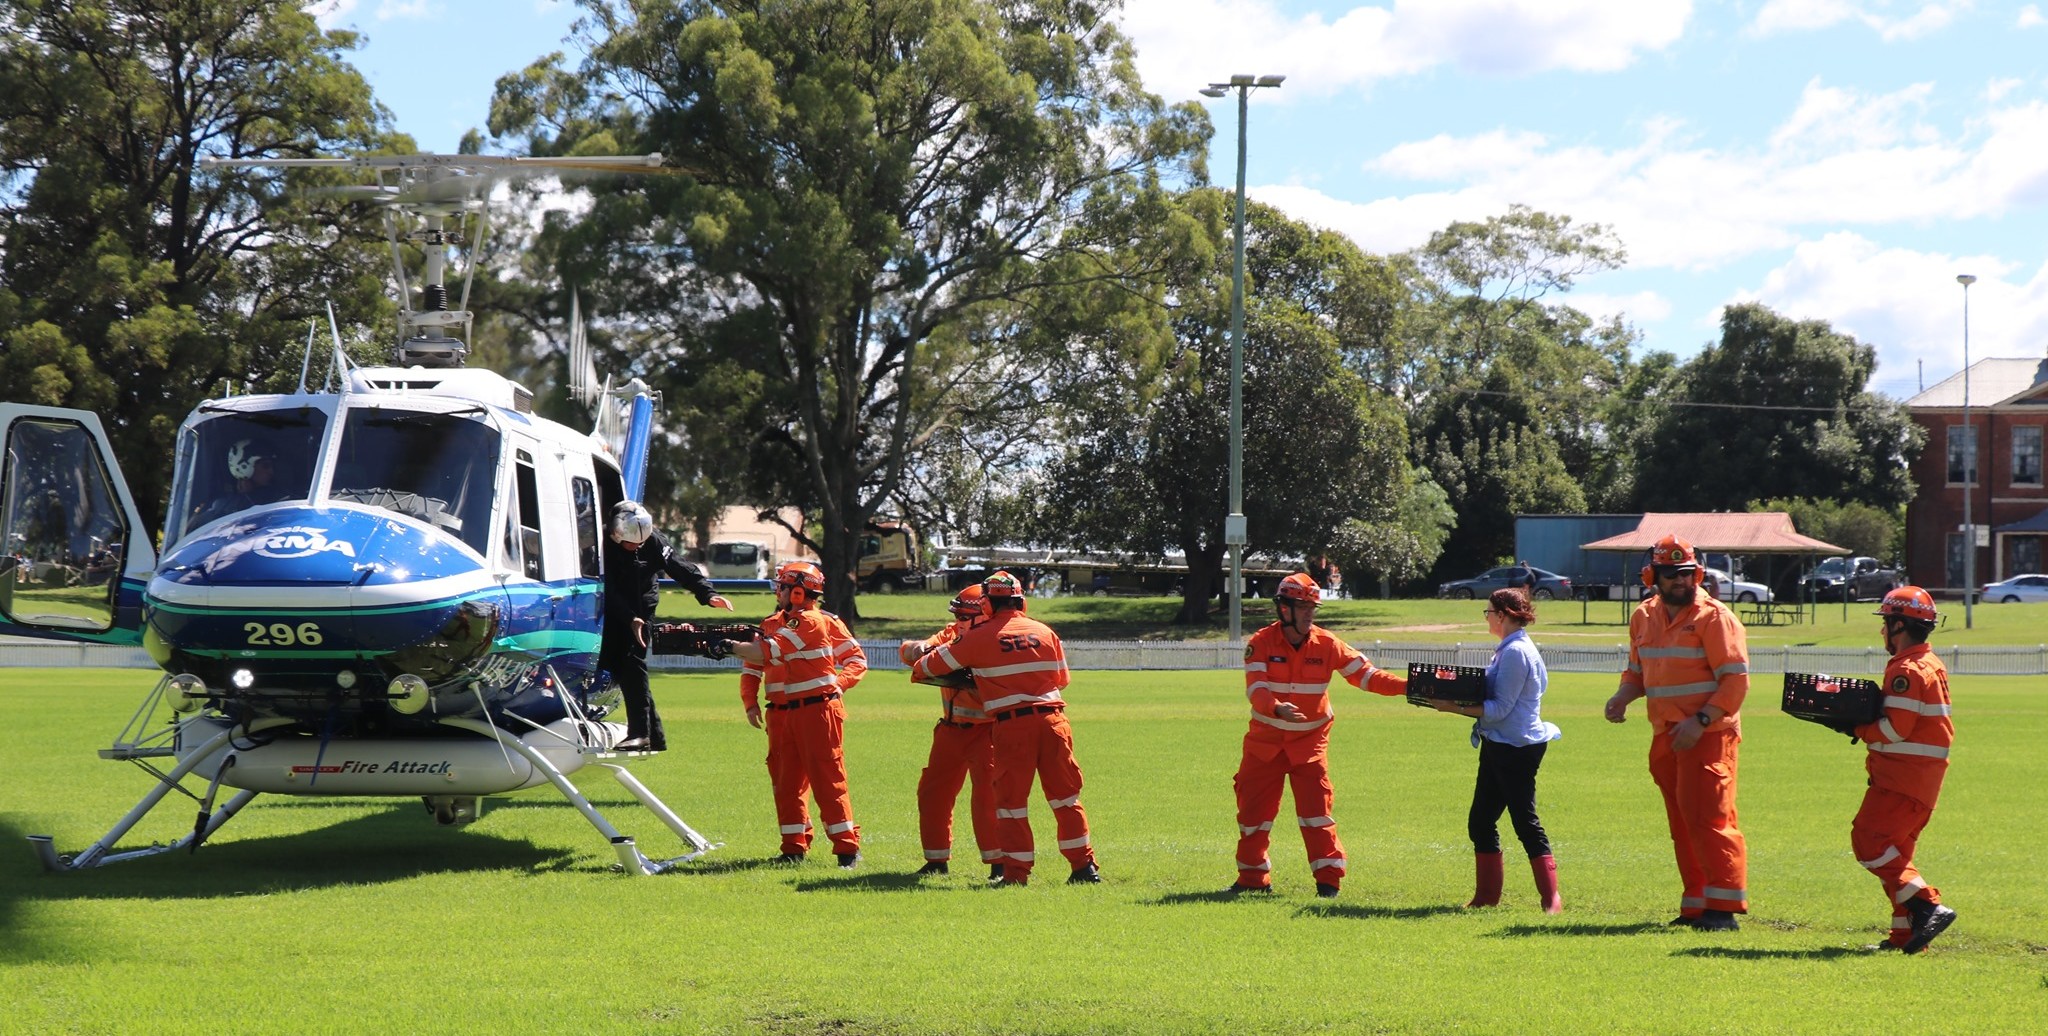 Hawkesbury MP, Susan Templeman helped in the emergency transport